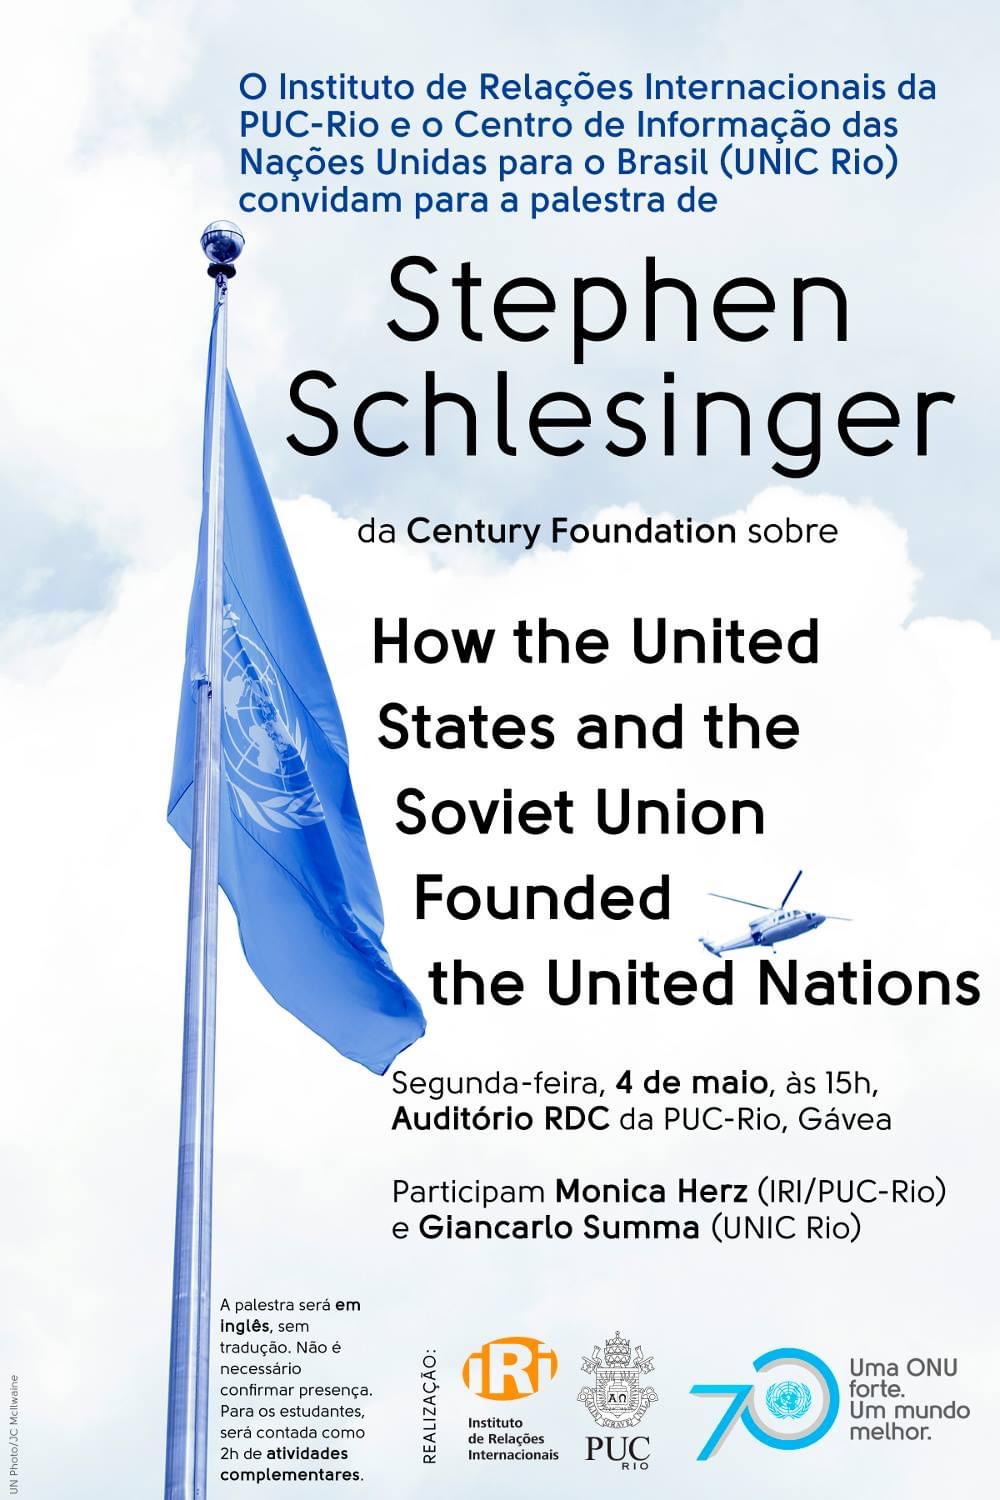 How The United States and the Soviet Union Founded the United Nations